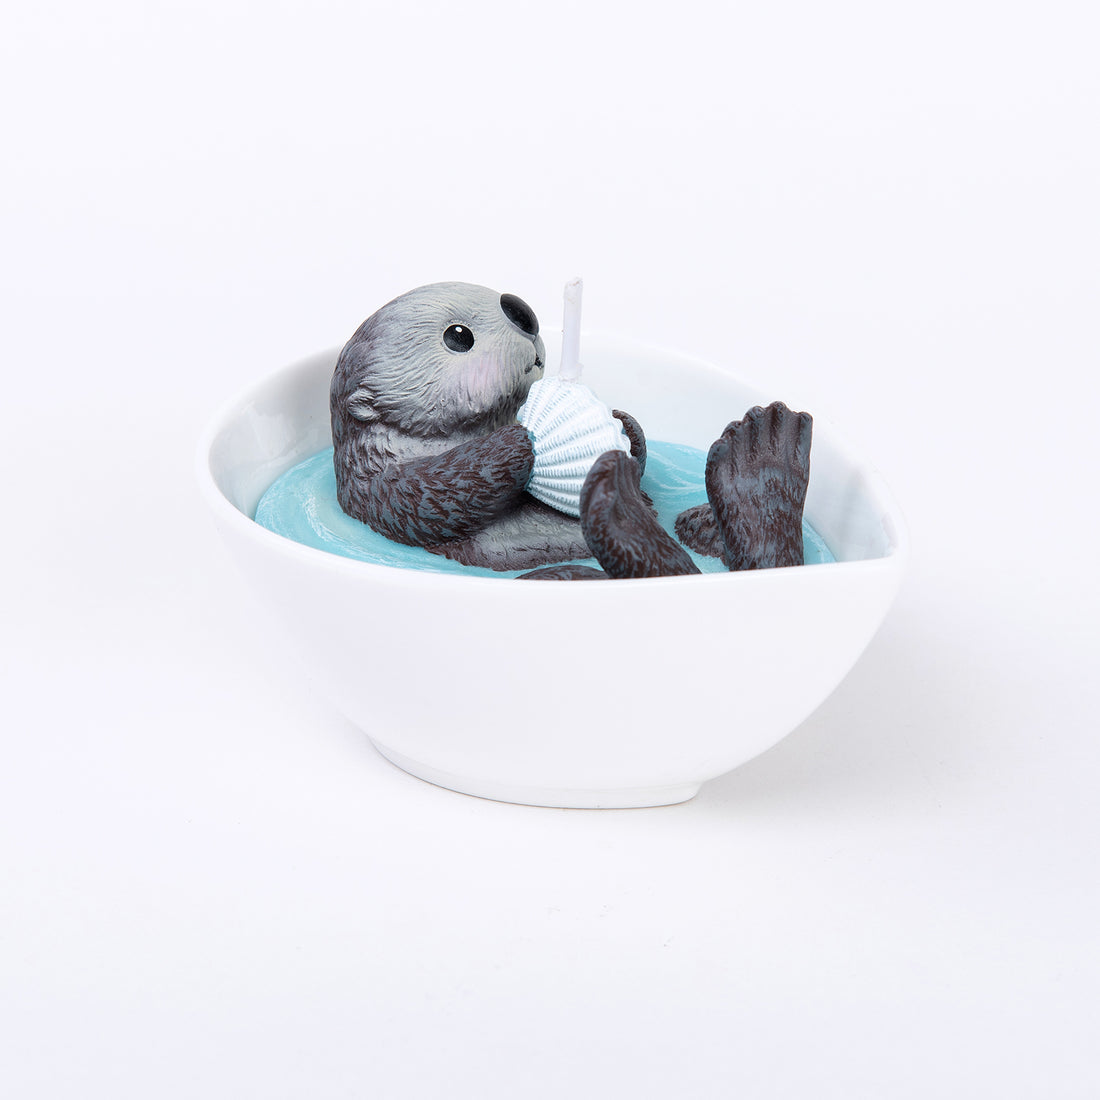 Make the evenings more beautiful with this Cute Sea Otter Baby Scented Candle from Southlake Gifts.